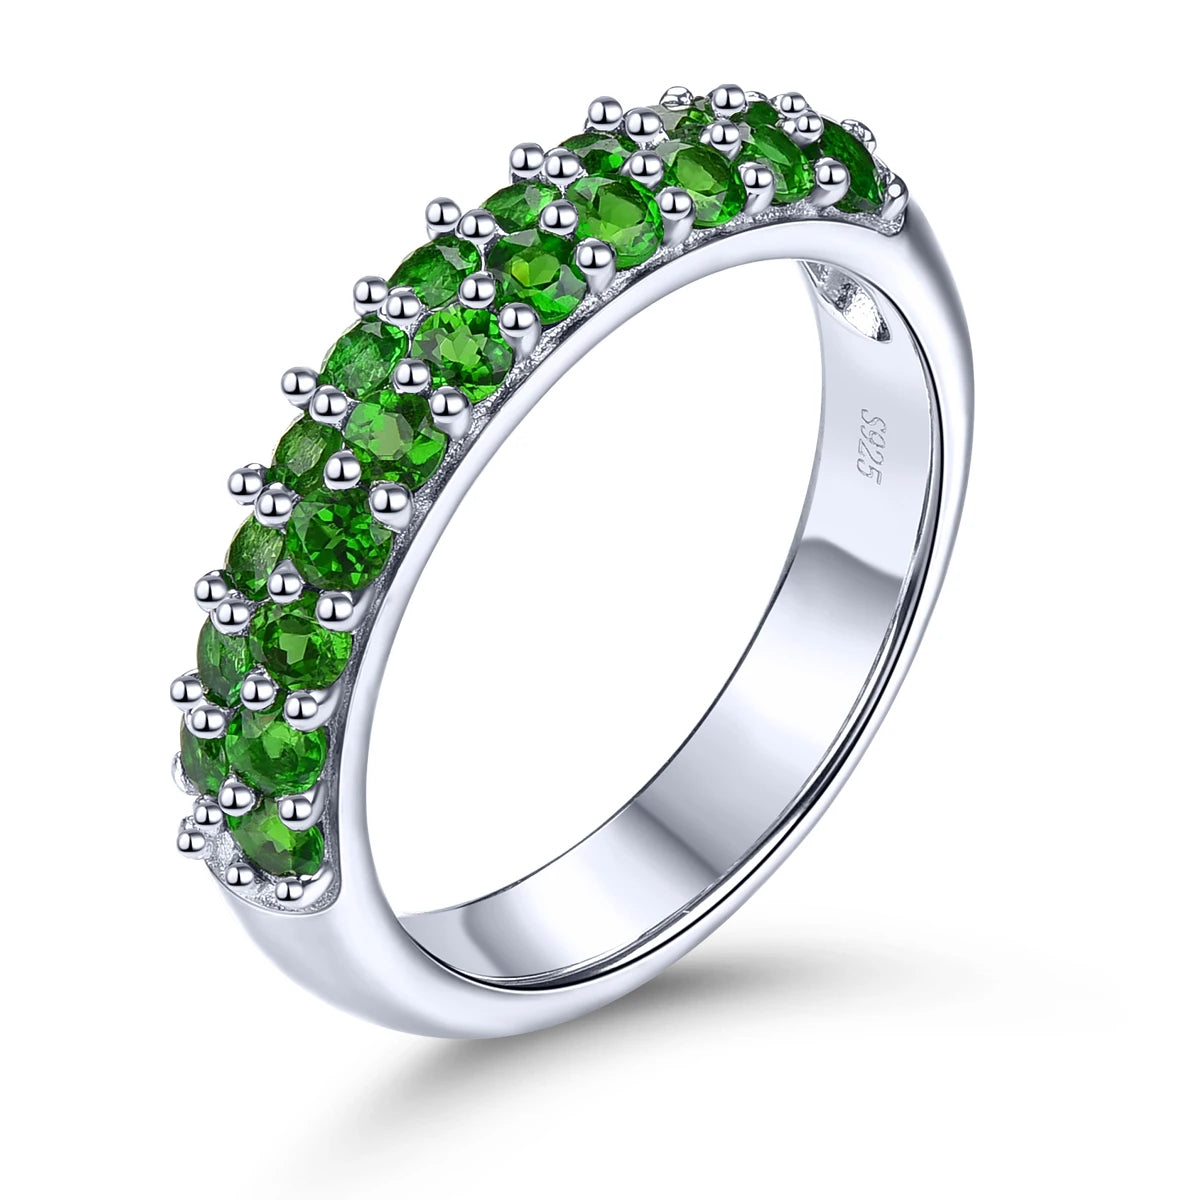 Natural Chrome Diopside Sterling Silver Rings 1 Carats Genuine Gemstone Women Classic Jewelry Style Top Quality Birthday Gifts Natural Diopside